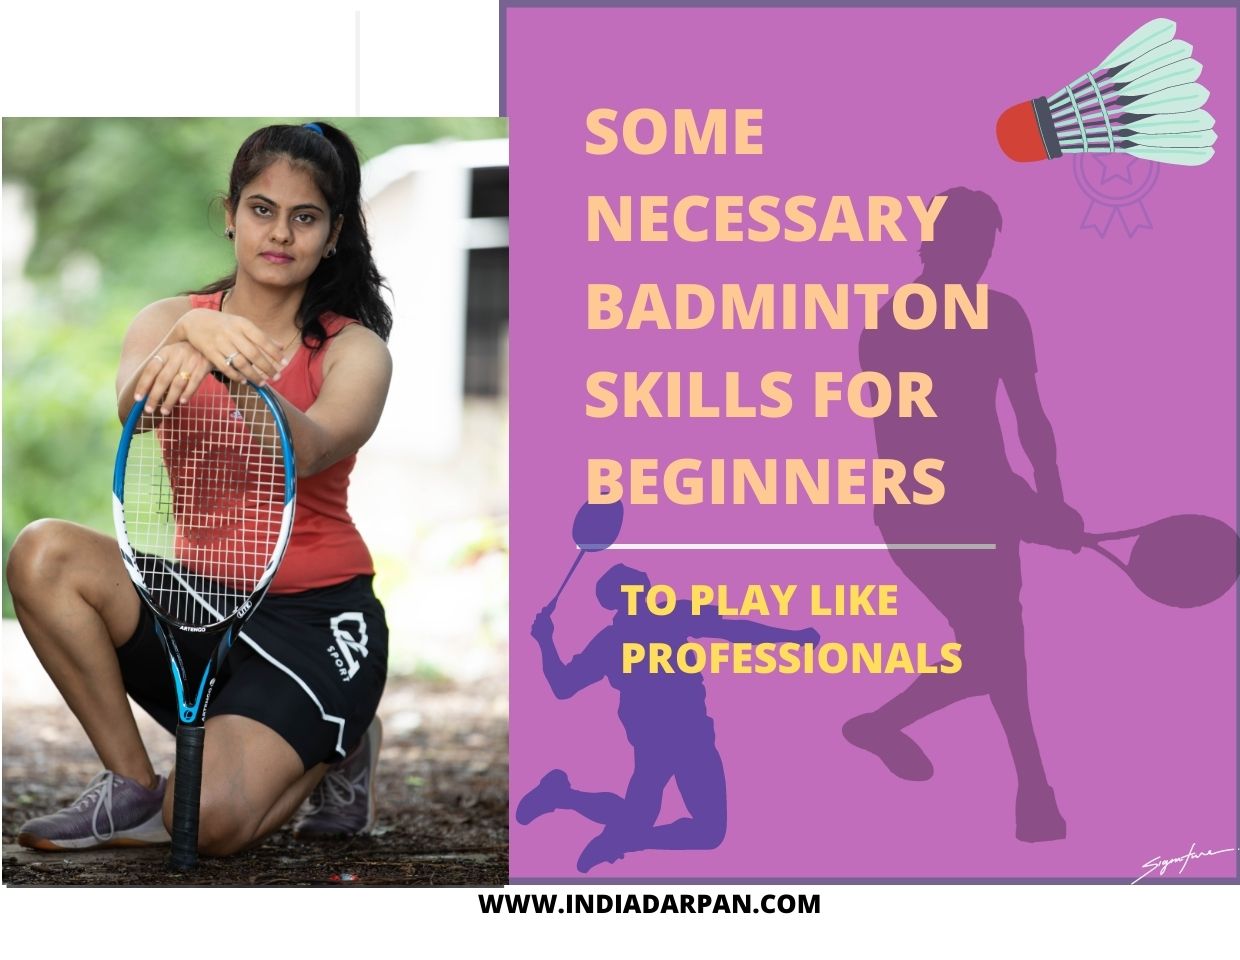 Some necessary badminton skills for beginners to play like professionals